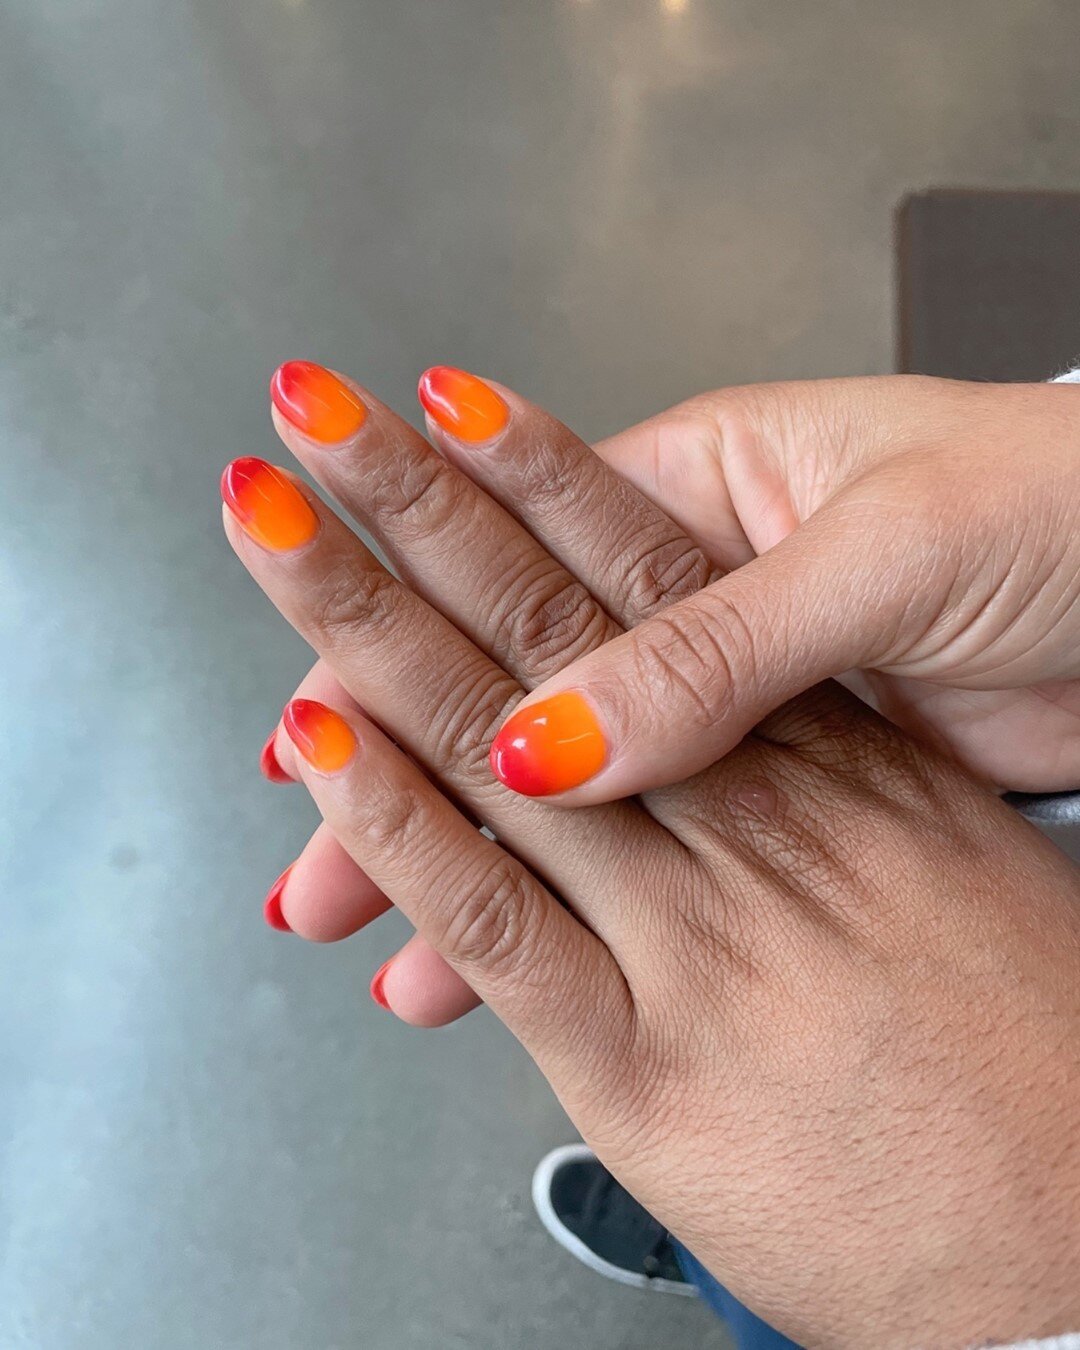 Get a fresh mani without harmful chemicals. The non-toxic gel polishes we use are great for nail art, have unique effects like this temperature-changing color, and last for weeks. Everything you want from your mani without the things you don't!⁠
⁠
#t